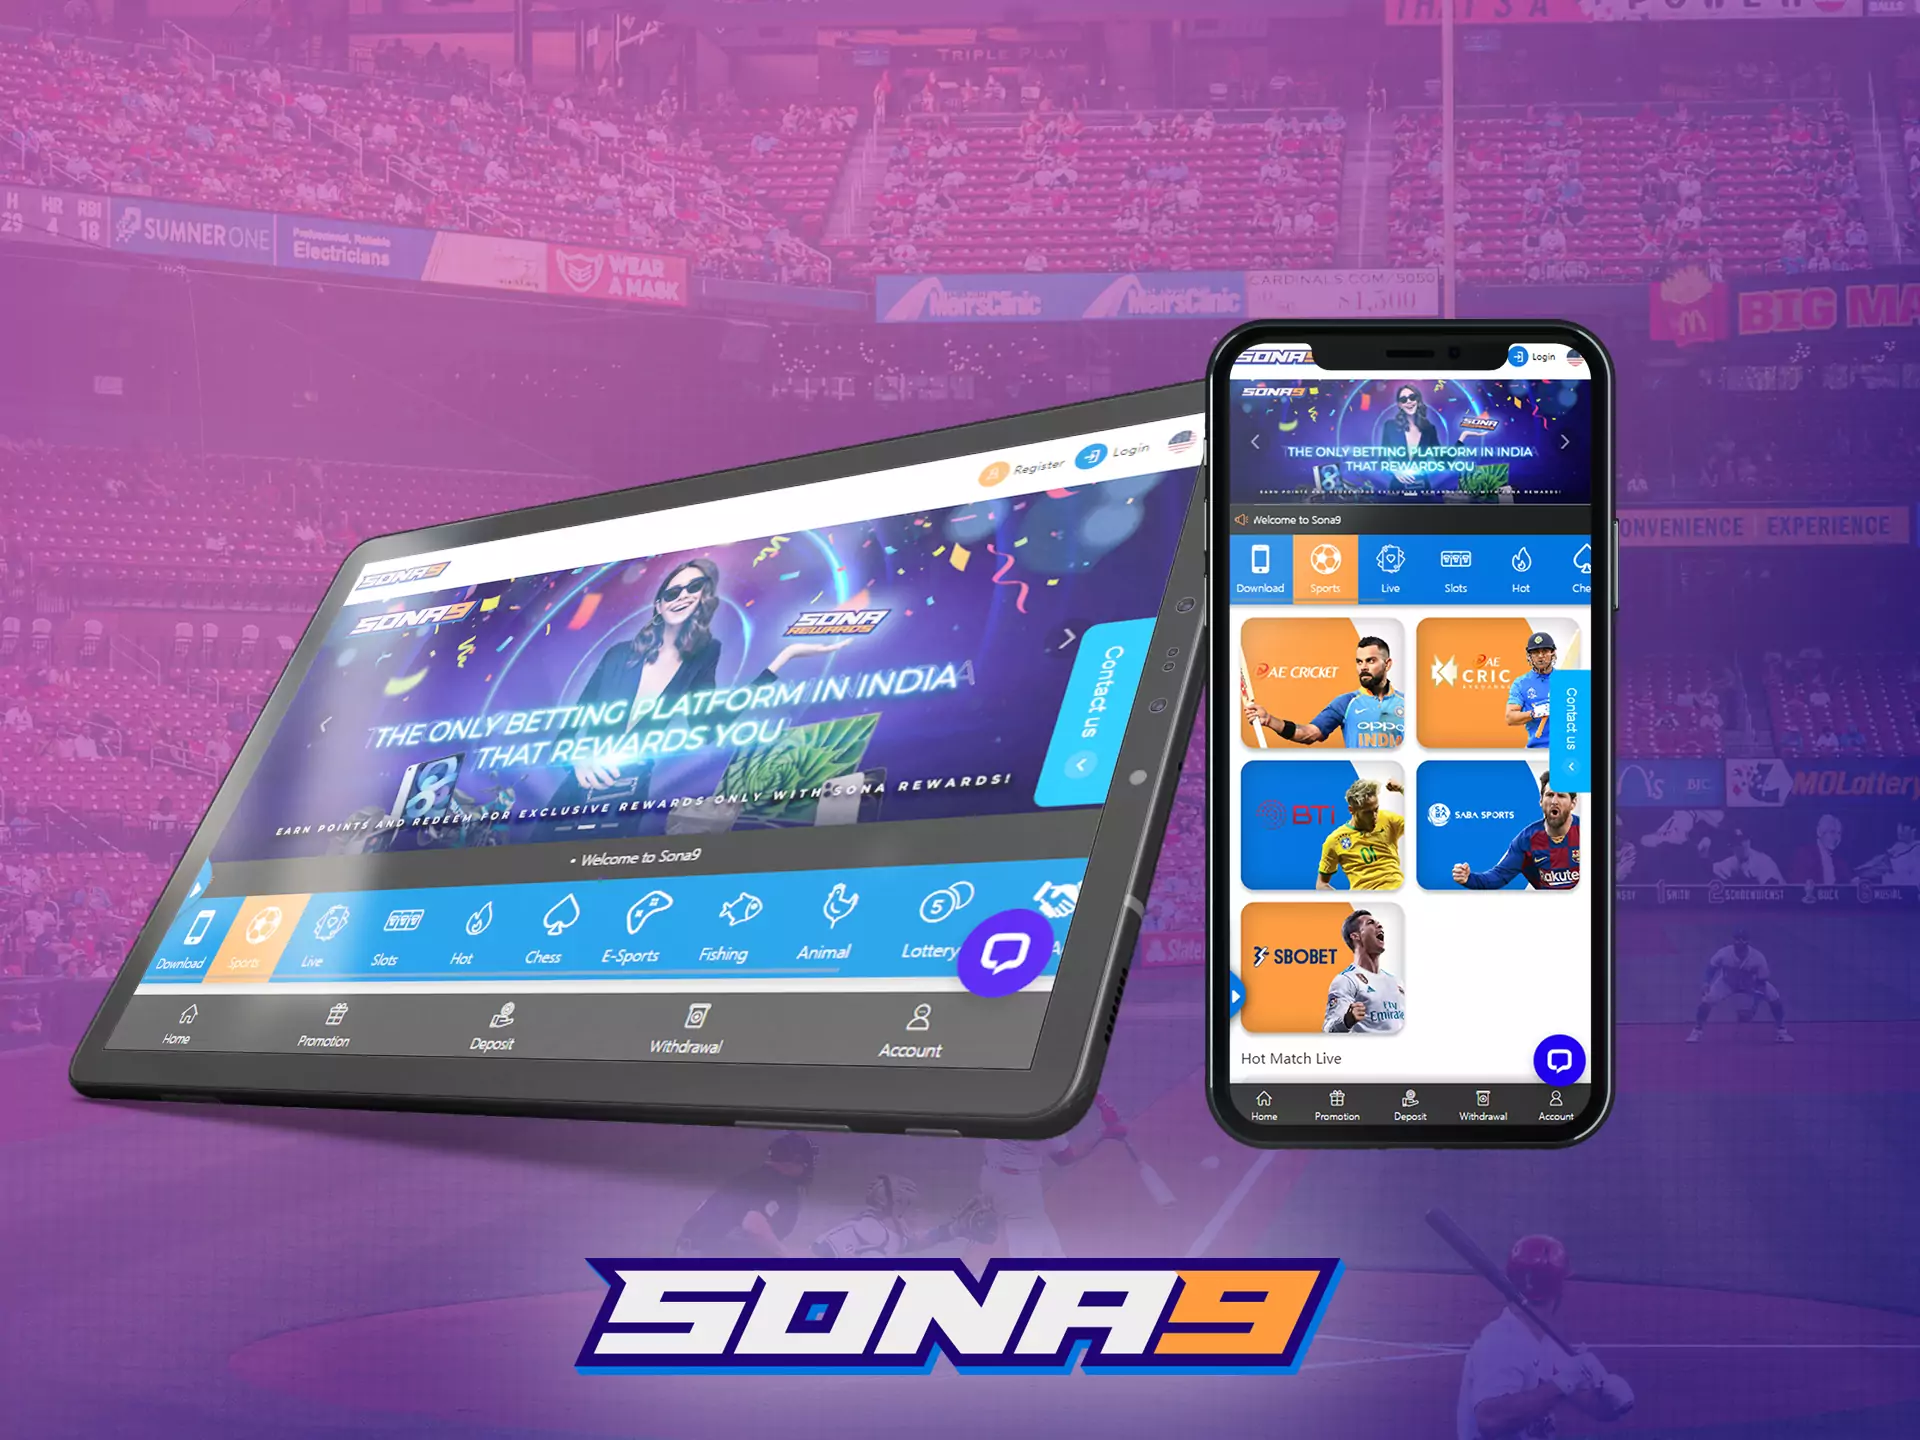 Screen the QR code to find the link to the last Sona9 app version for iOS devices.